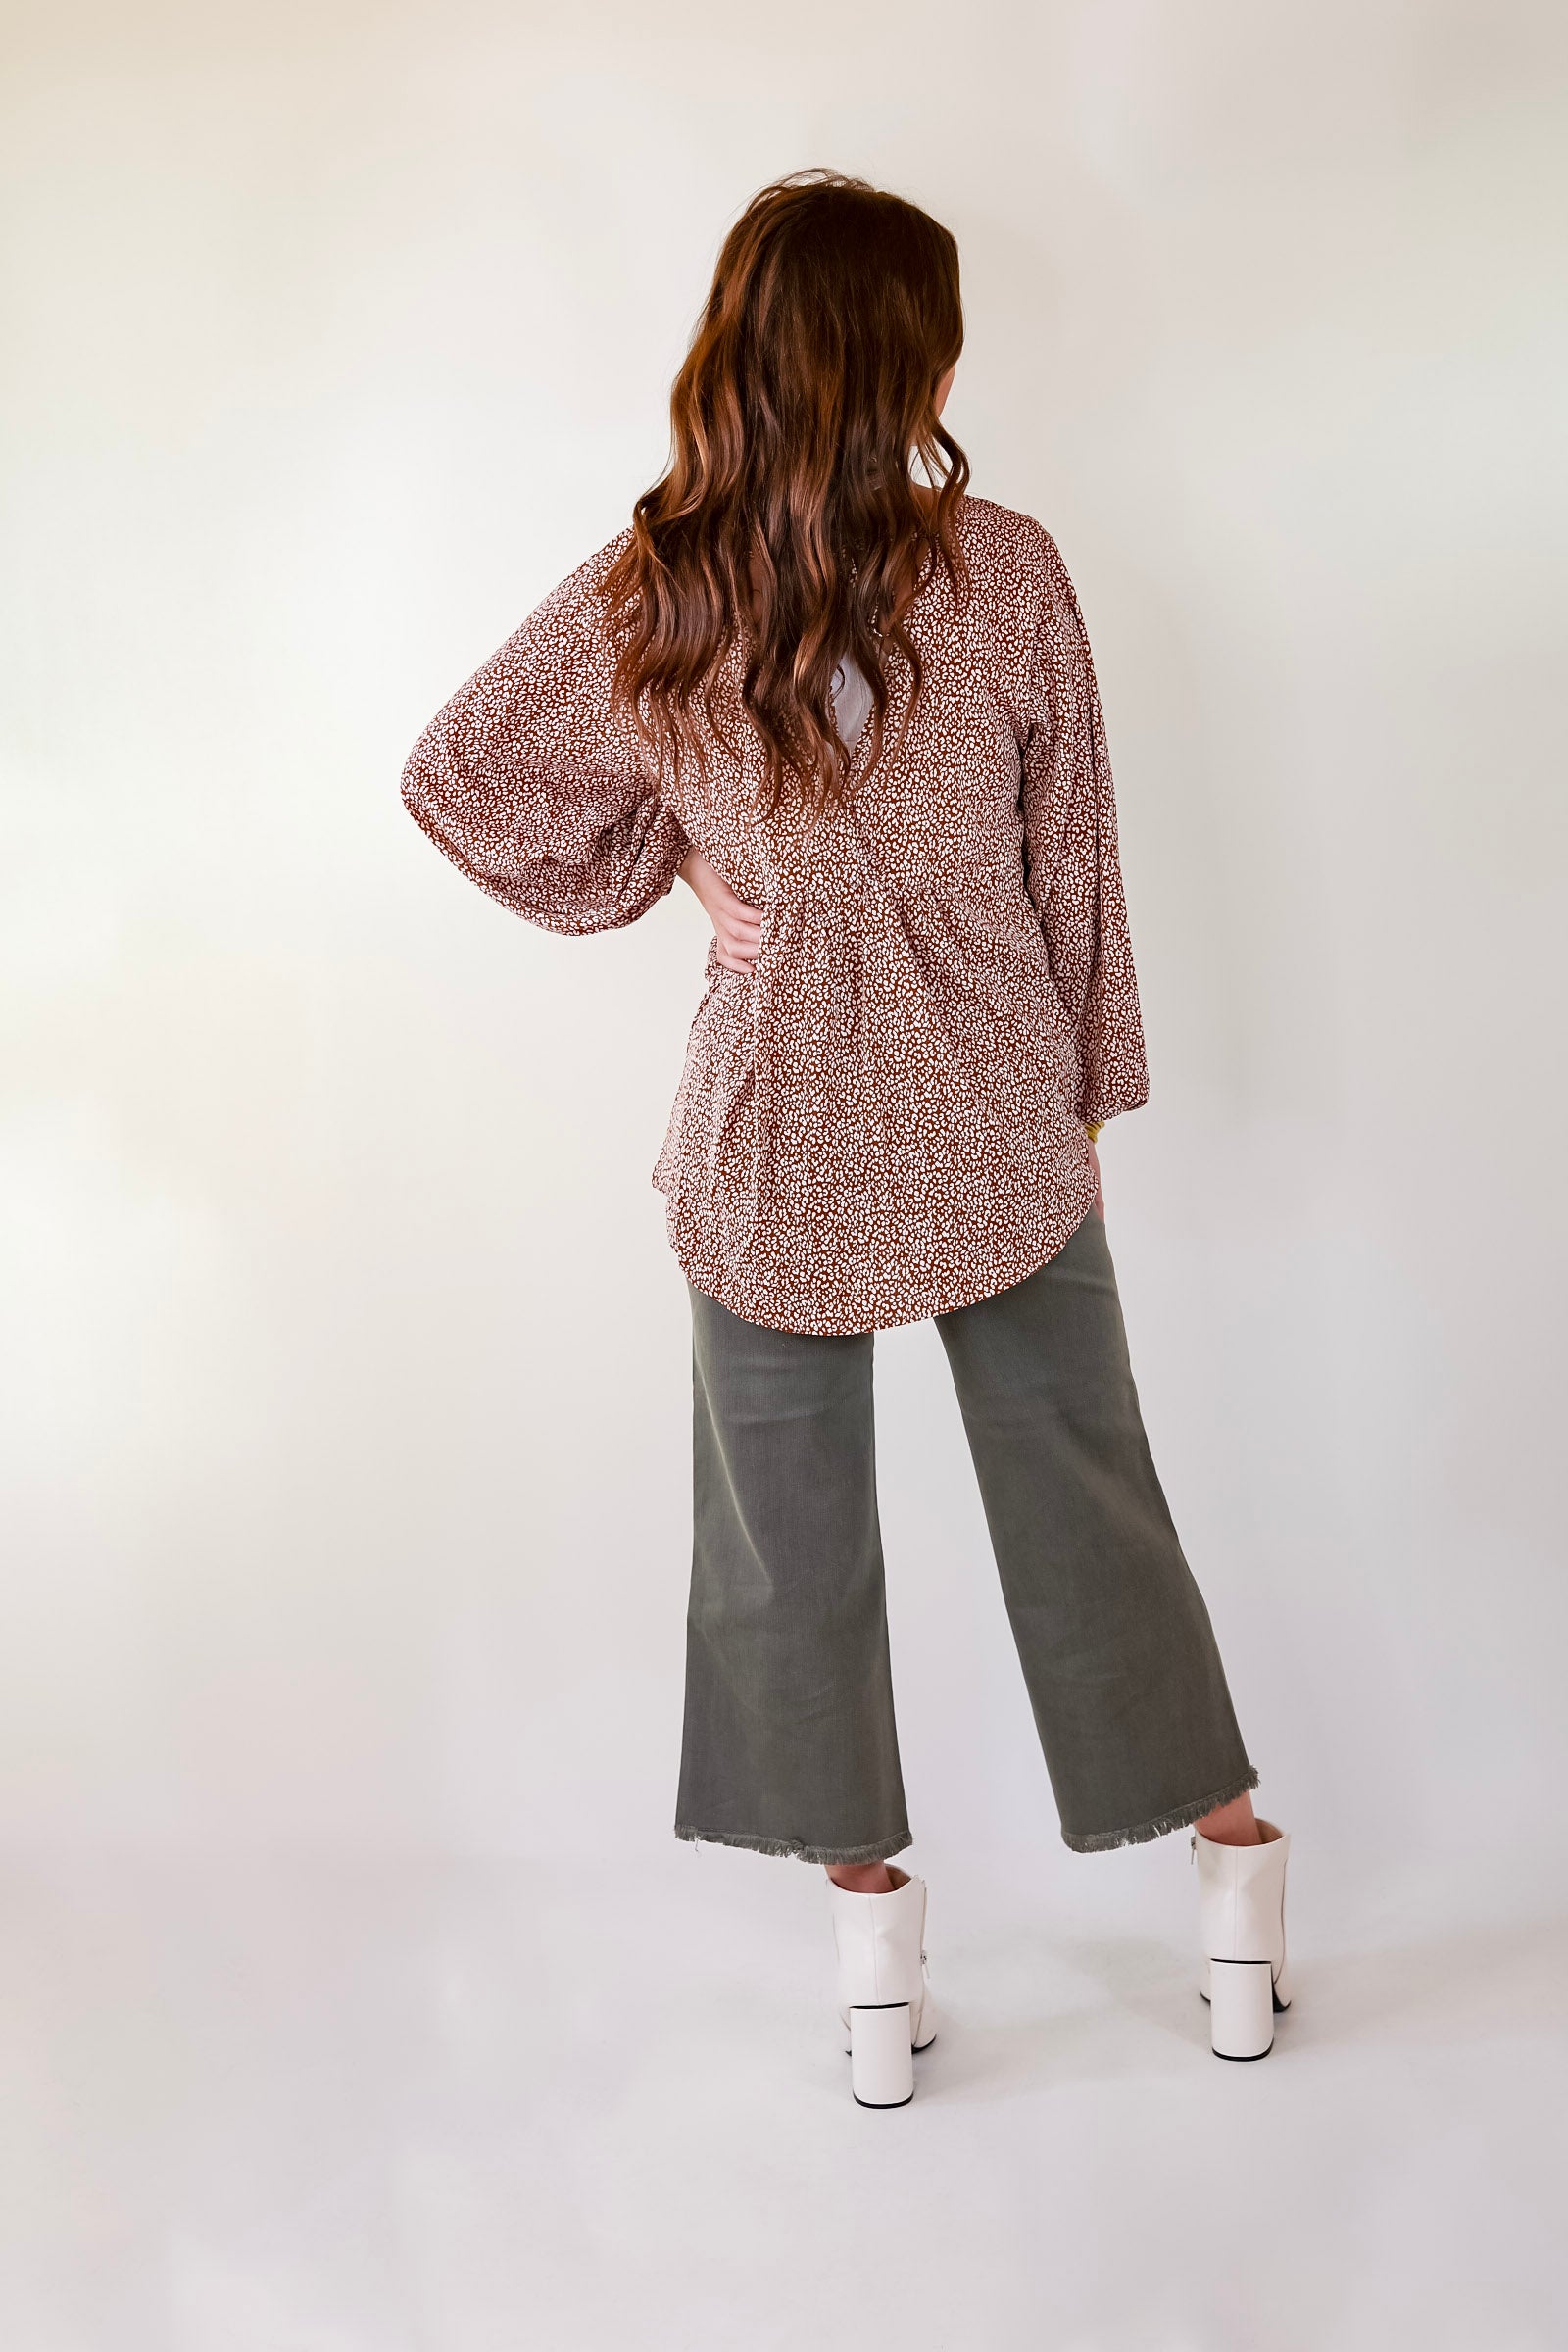 Really Dreamy Small Leopard Print Babydoll Top with Long Sleeves in Brown - Giddy Up Glamour Boutique